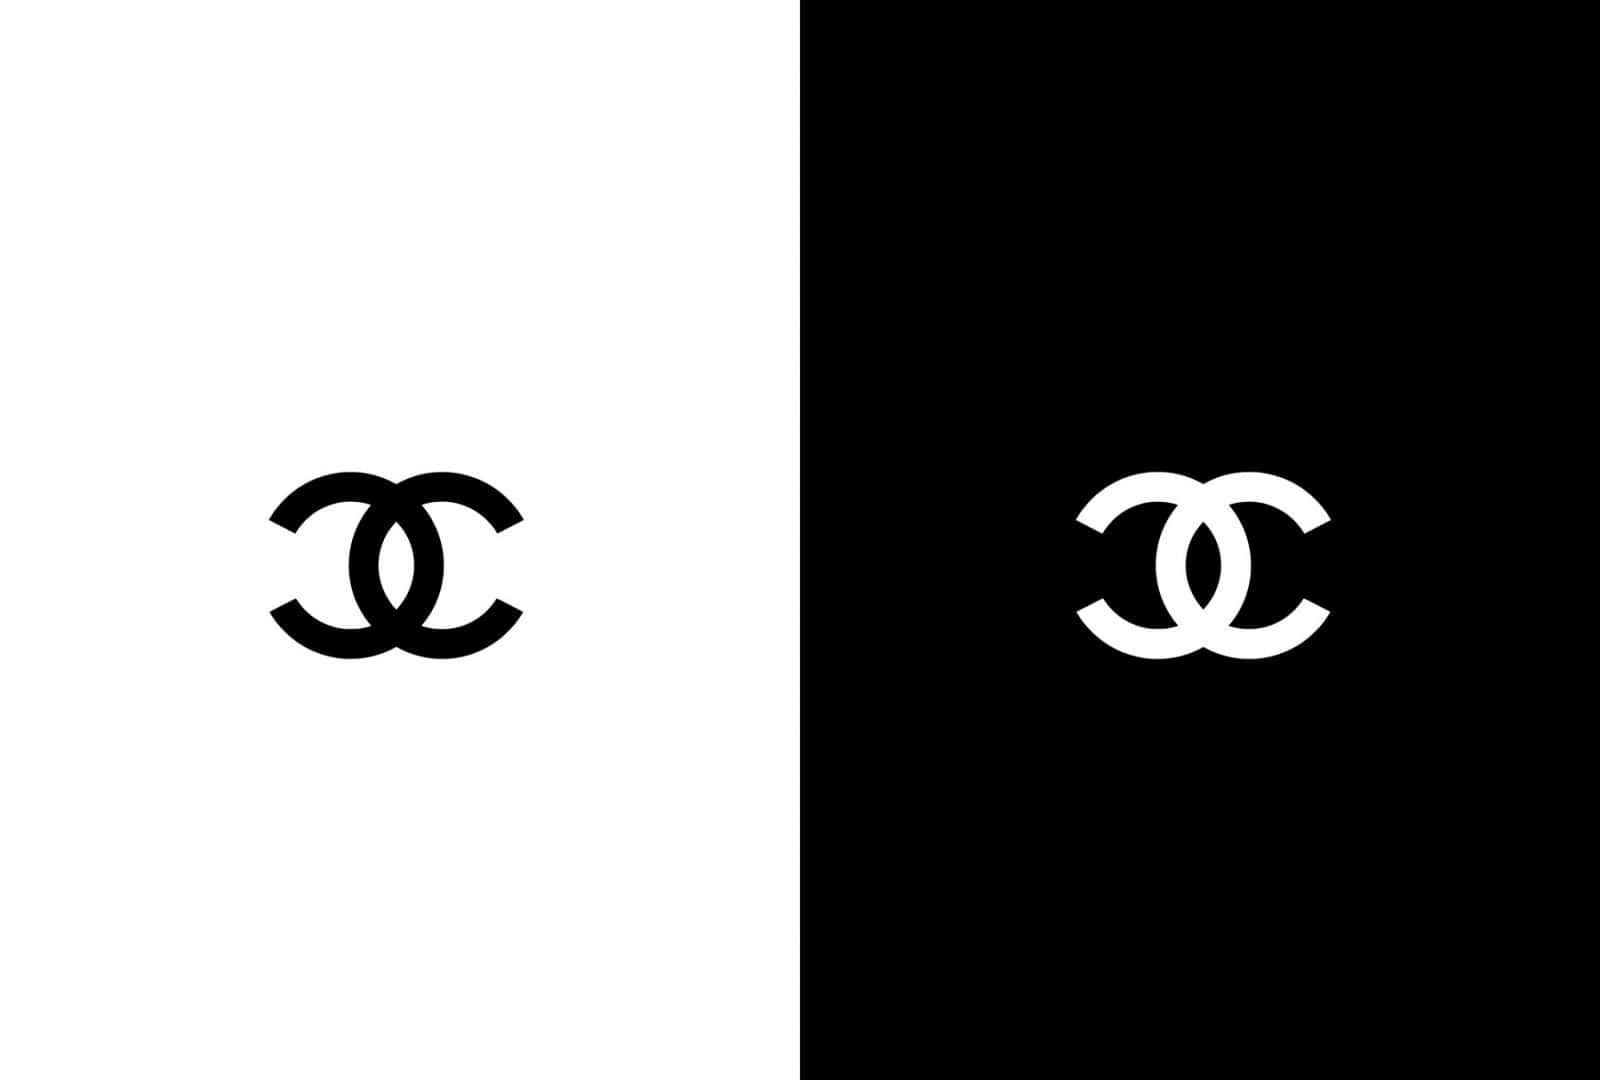 Download The iconic logo of luxury French fashion house Chanel